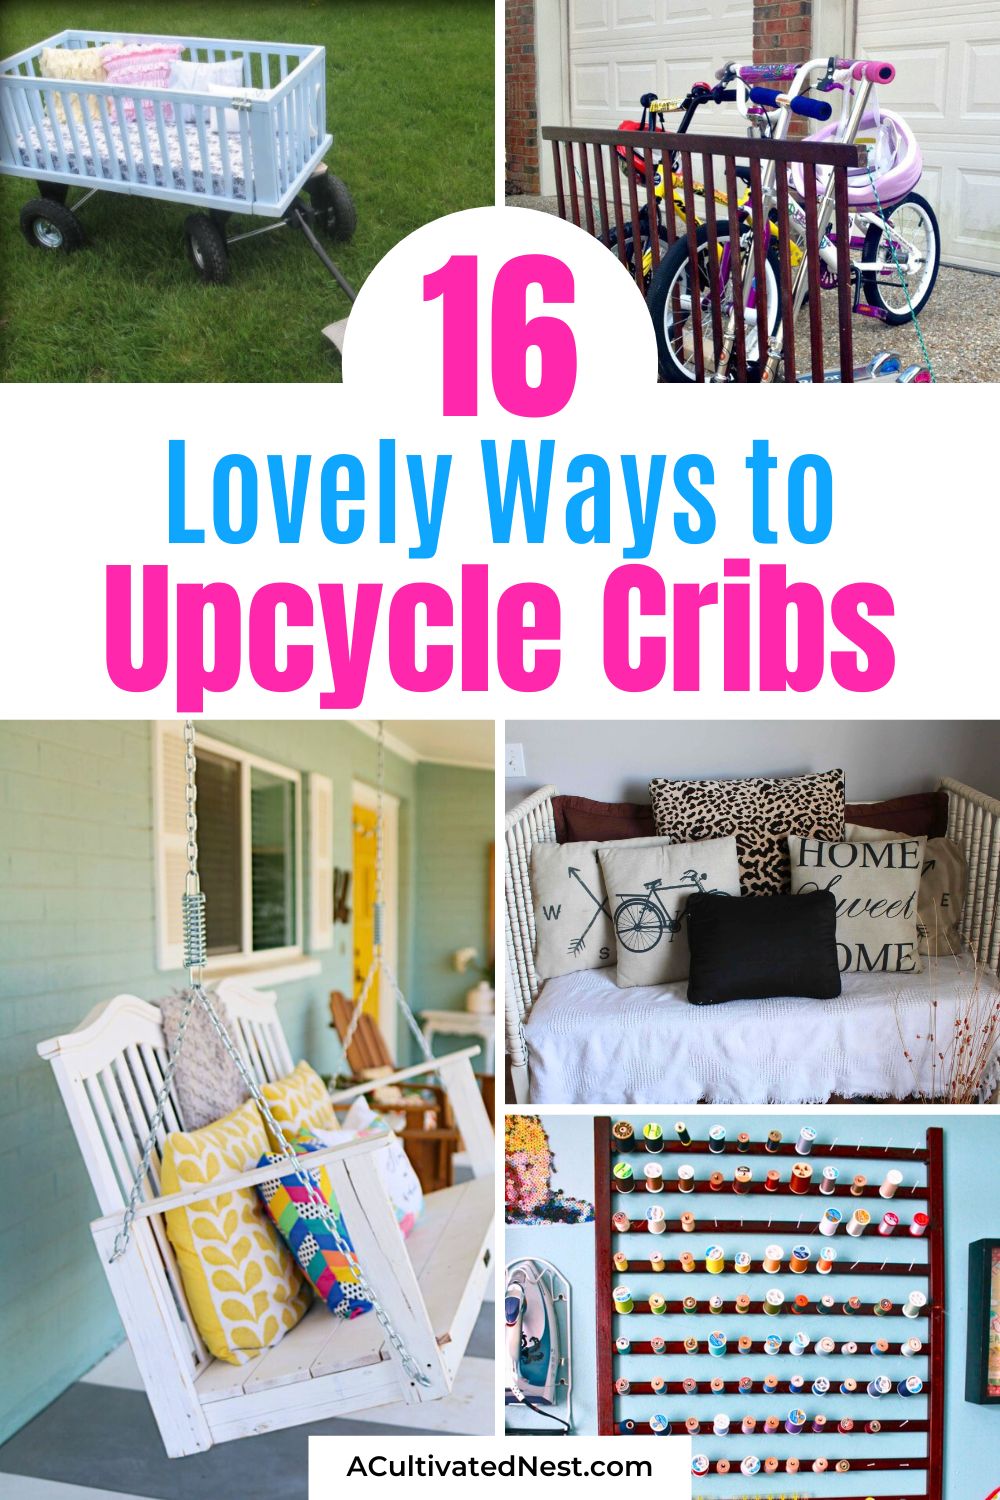 16 Clever Crib Upcycles- Don't let your baby's outgrown crib gather dust! Dive into our collection of ingenious crib upcycle projects that will breathe new life into your old furniture. Save for later and get ready to transform your nursery staple into treasures!| #UpcyclingIdeas #HomeDIY #upcycle #DIY #ACultivatedNest